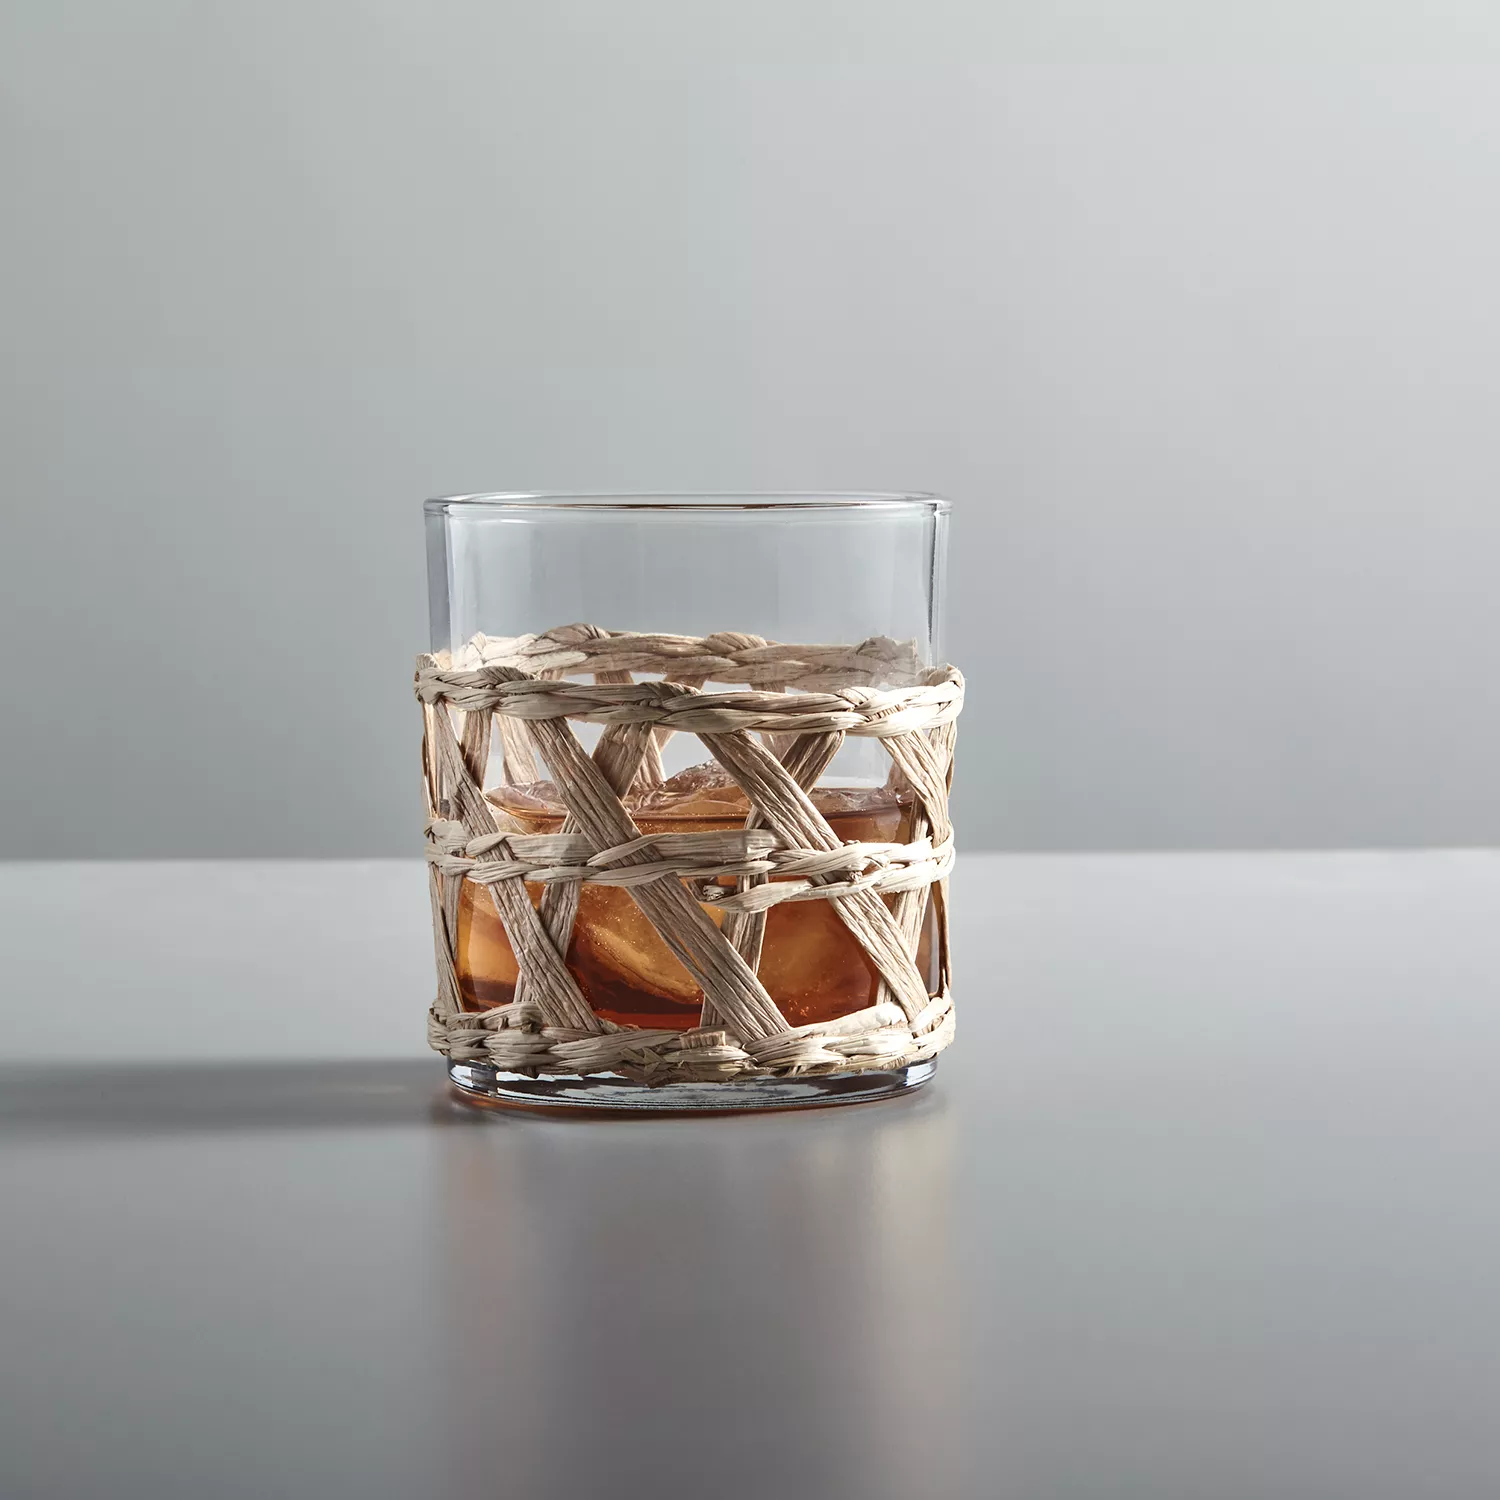 Sur La Table Wicker-Wrapped Double Old-Fashioned Glasses